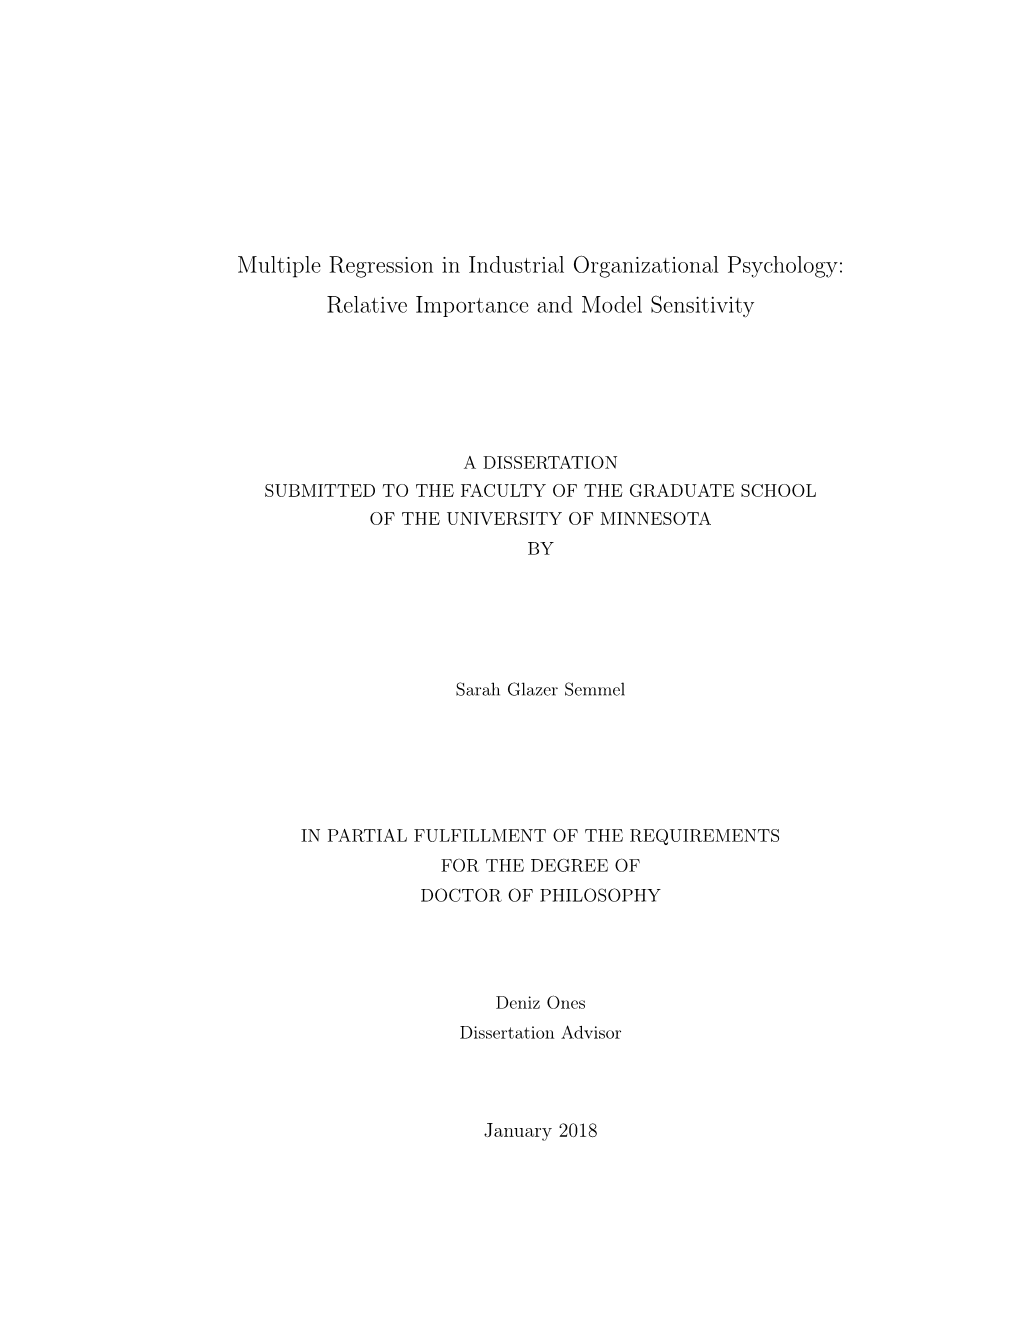 Multiple Regression in Industrial Organizational Psychology: Relative Importance and Model Sensitivity